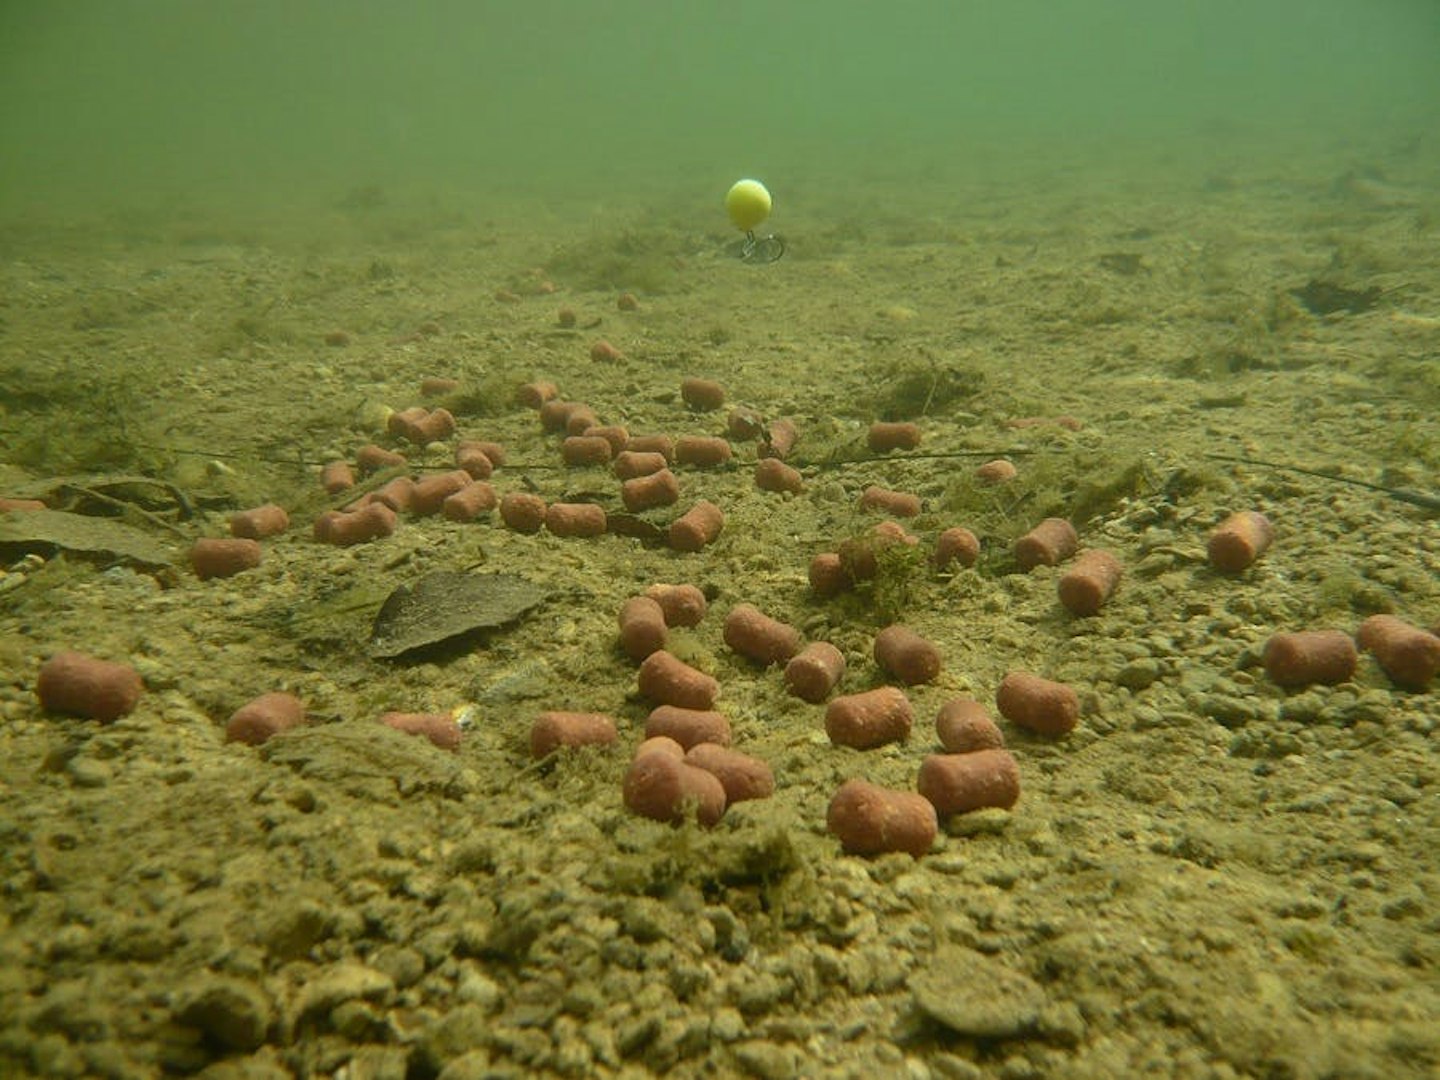 Boilies fall in tight piles when spodded out.